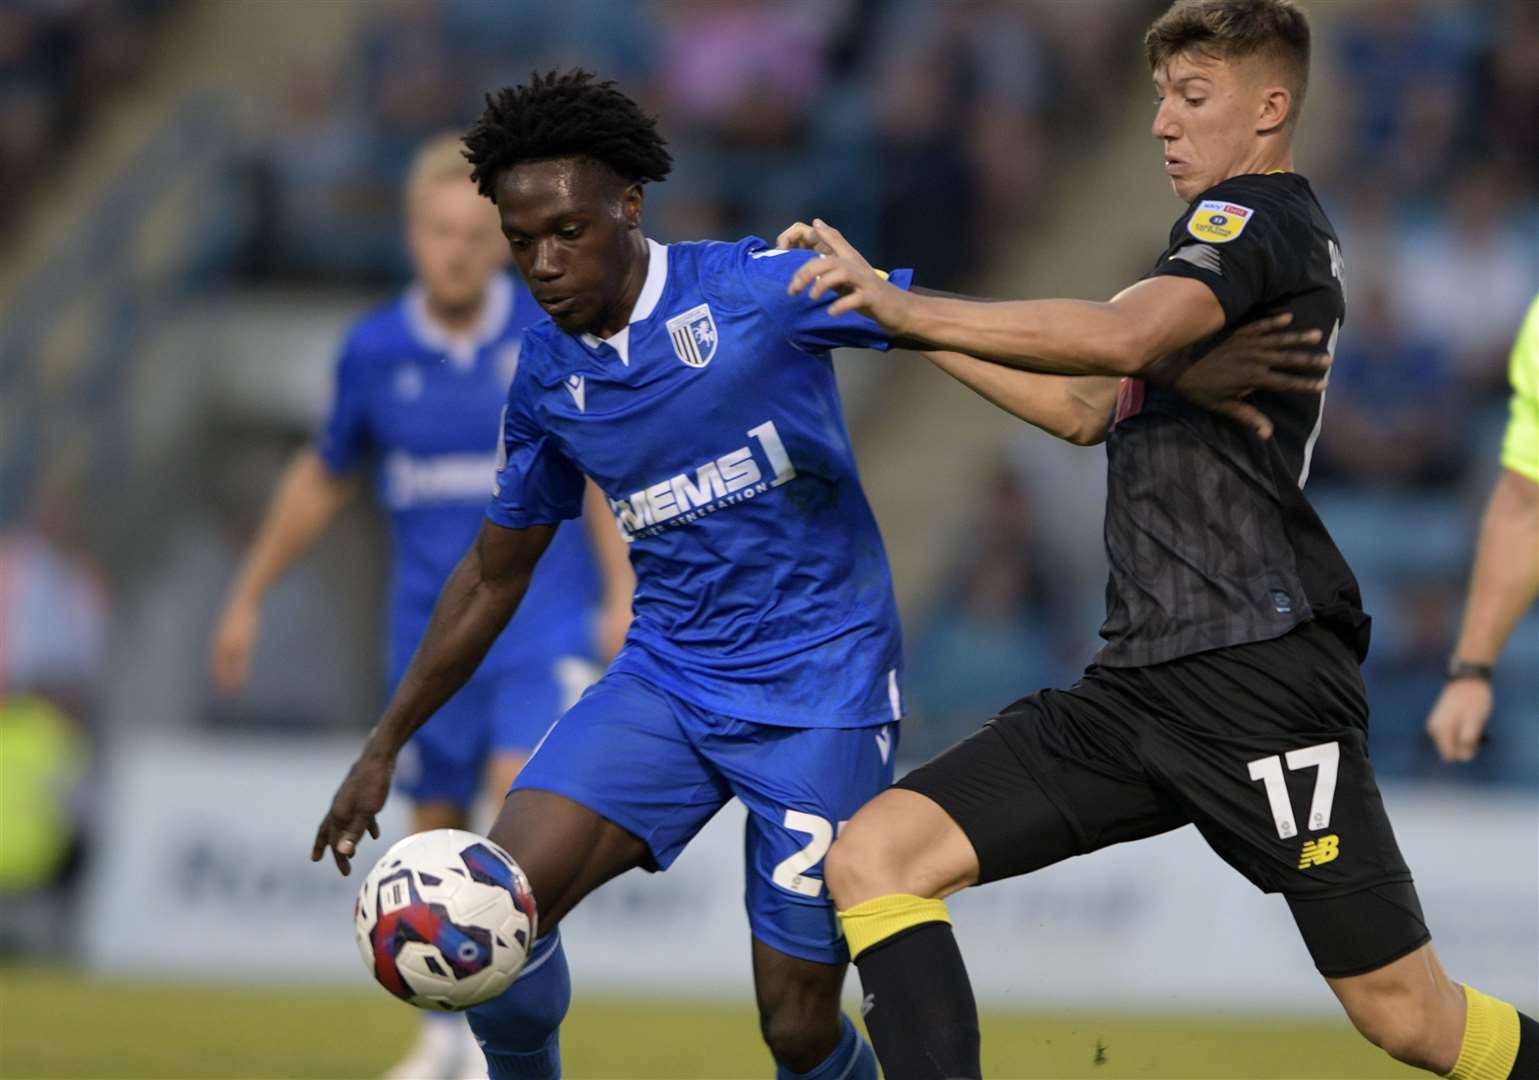 Gillingham winger Jordan Green takes on Harrogate's Josh Austerfield on Tuesday night during Gills' loss. Picture: Beau Goodwin